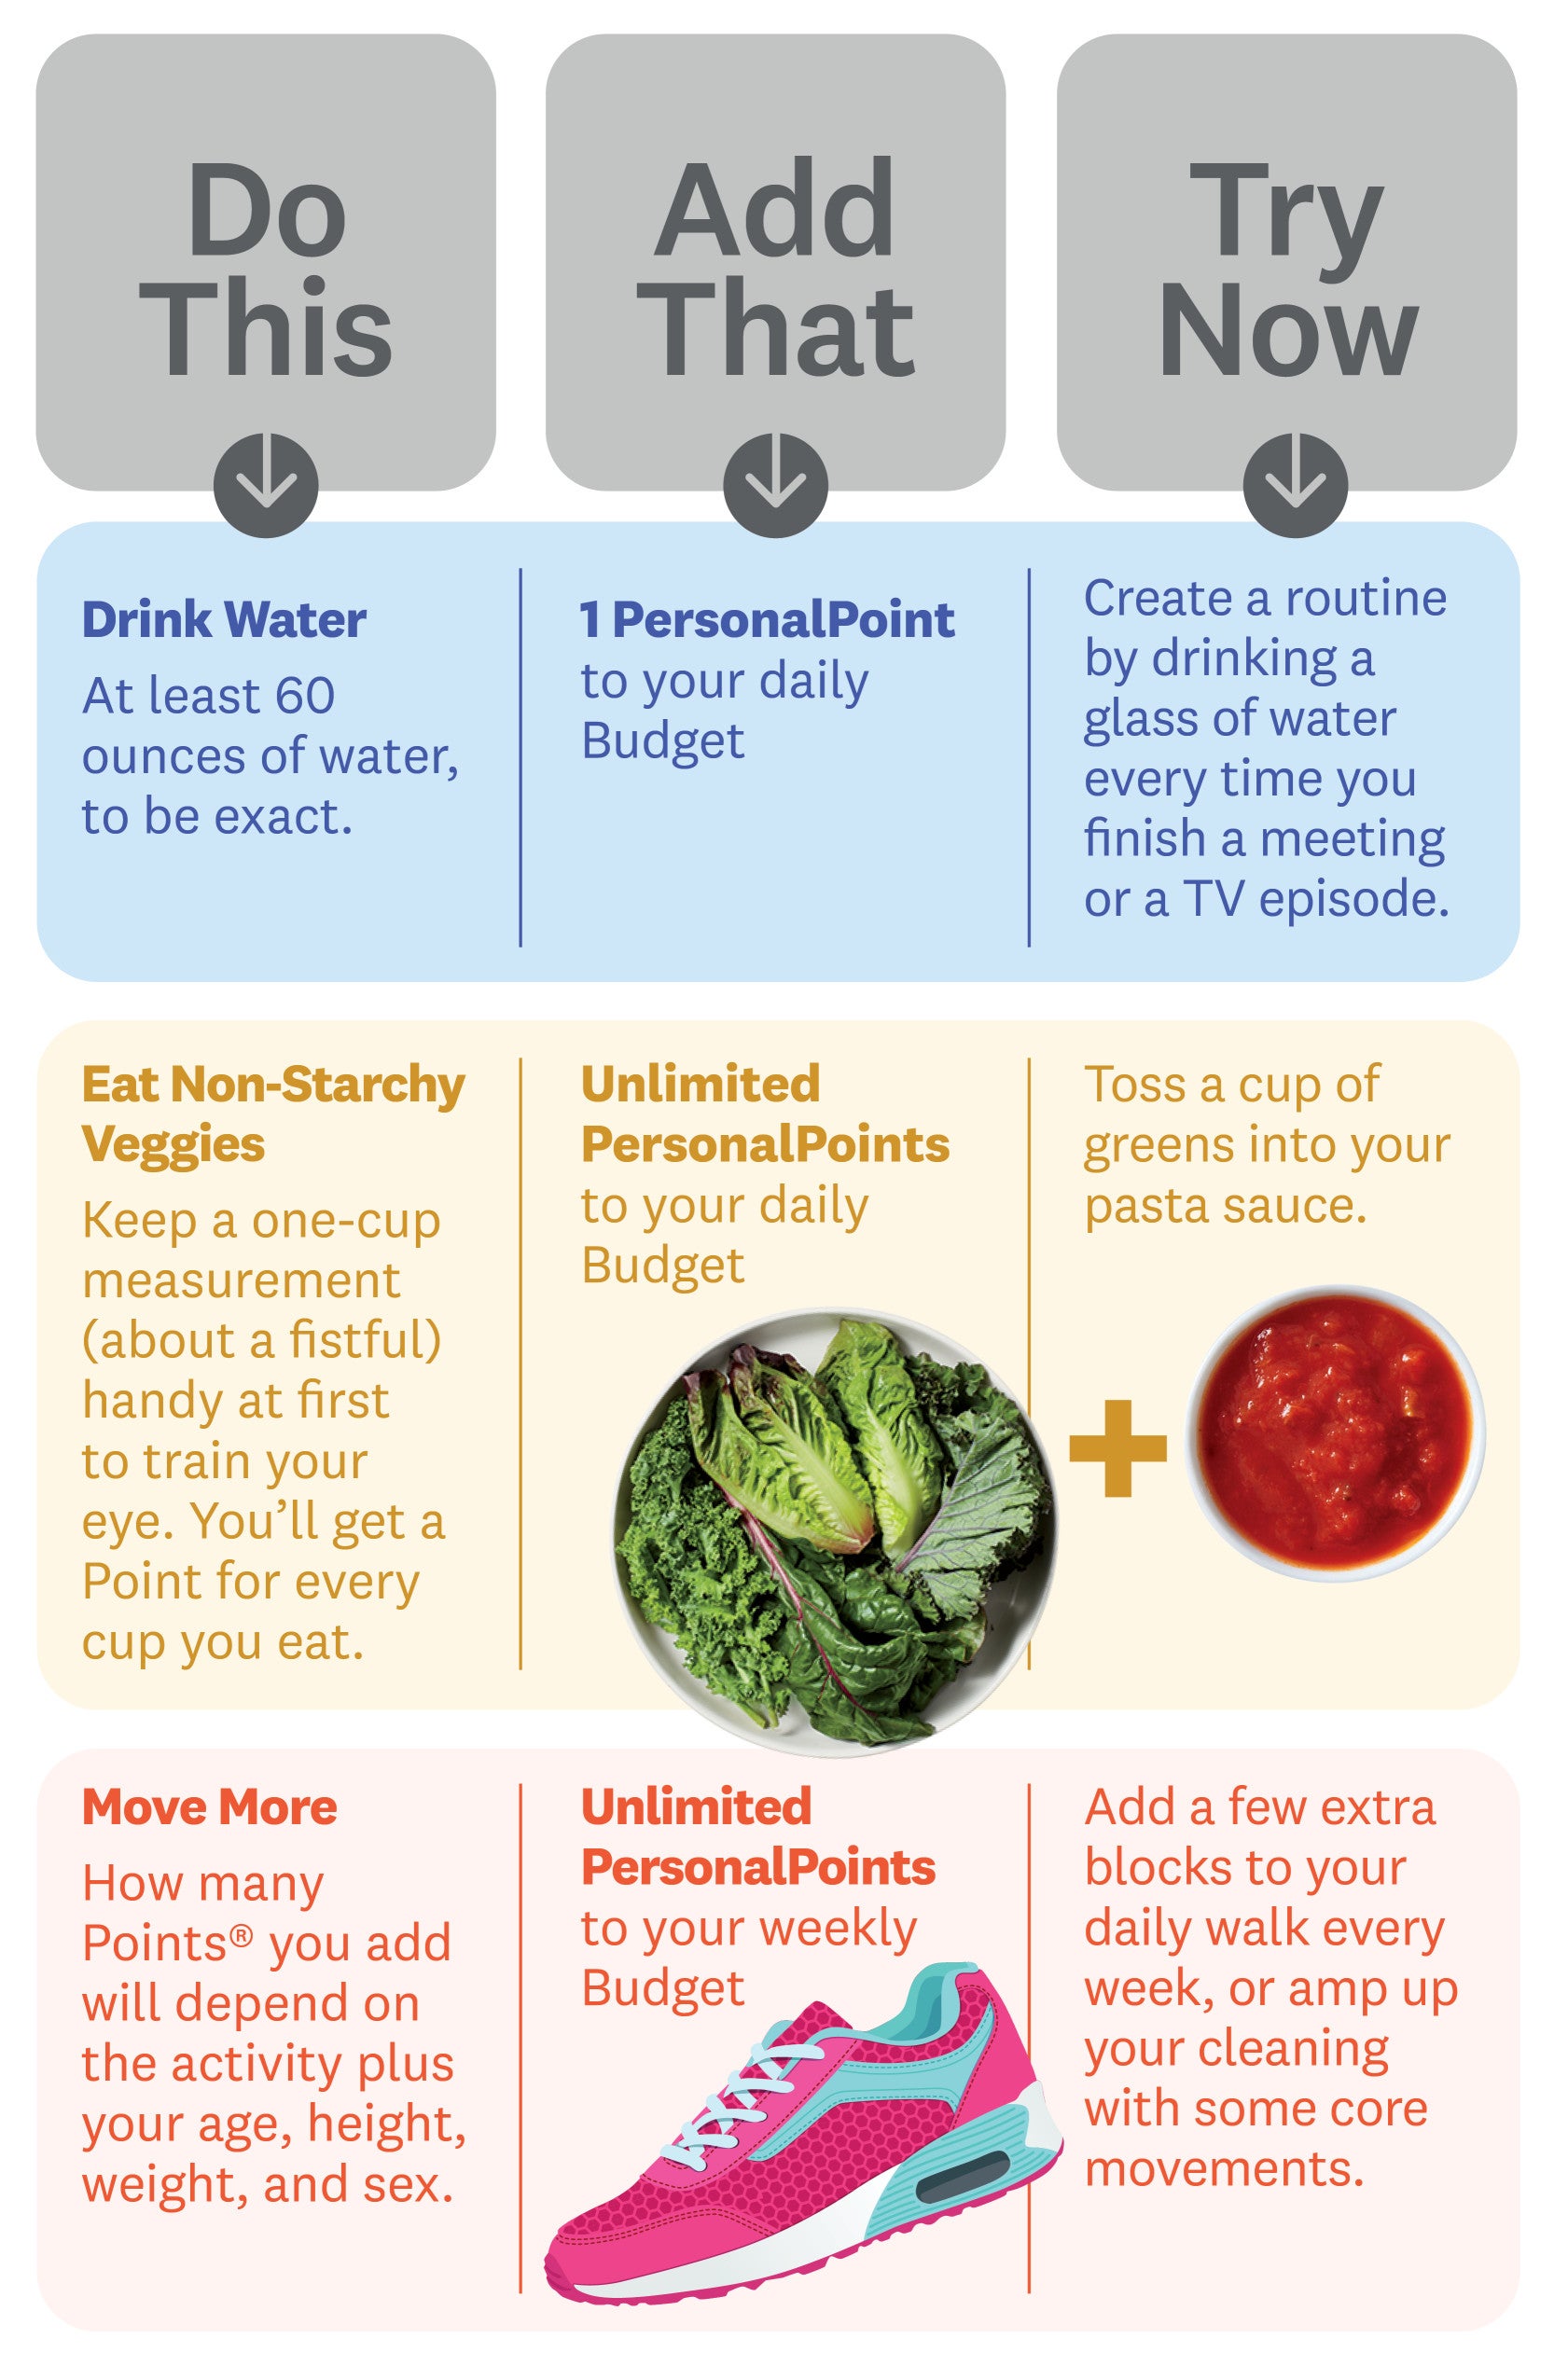 Chart with three columns. 1. Do This - Drink Water: At least 60 ounces of water, to be exact. Add That: 1 PersonalPoint to your daily Budget. Try Now: Create a routine by drinking a glass of water every time you finish a meeting or a TV episode. 2. Do This - Eat Non-Starchy Veggies: Keep a one-cup measurement (about a fistful) handy at first to train your eye. You’ll get a Point for every cup you eat. Add That: Unlimited PersonalPoints to your daily Budget. Try Now: Toss a cup of greens into your pasta sauce. 3. Do This - Move More: How many Points® you add will depend on the activity plus your age, height, weight, and biological sex. Add This: Unlimited PersonalPoints to your weekly Budget. Try Now: Add a few extra blocks to your daily walk every week, or amp up your cleaning with some core movements.